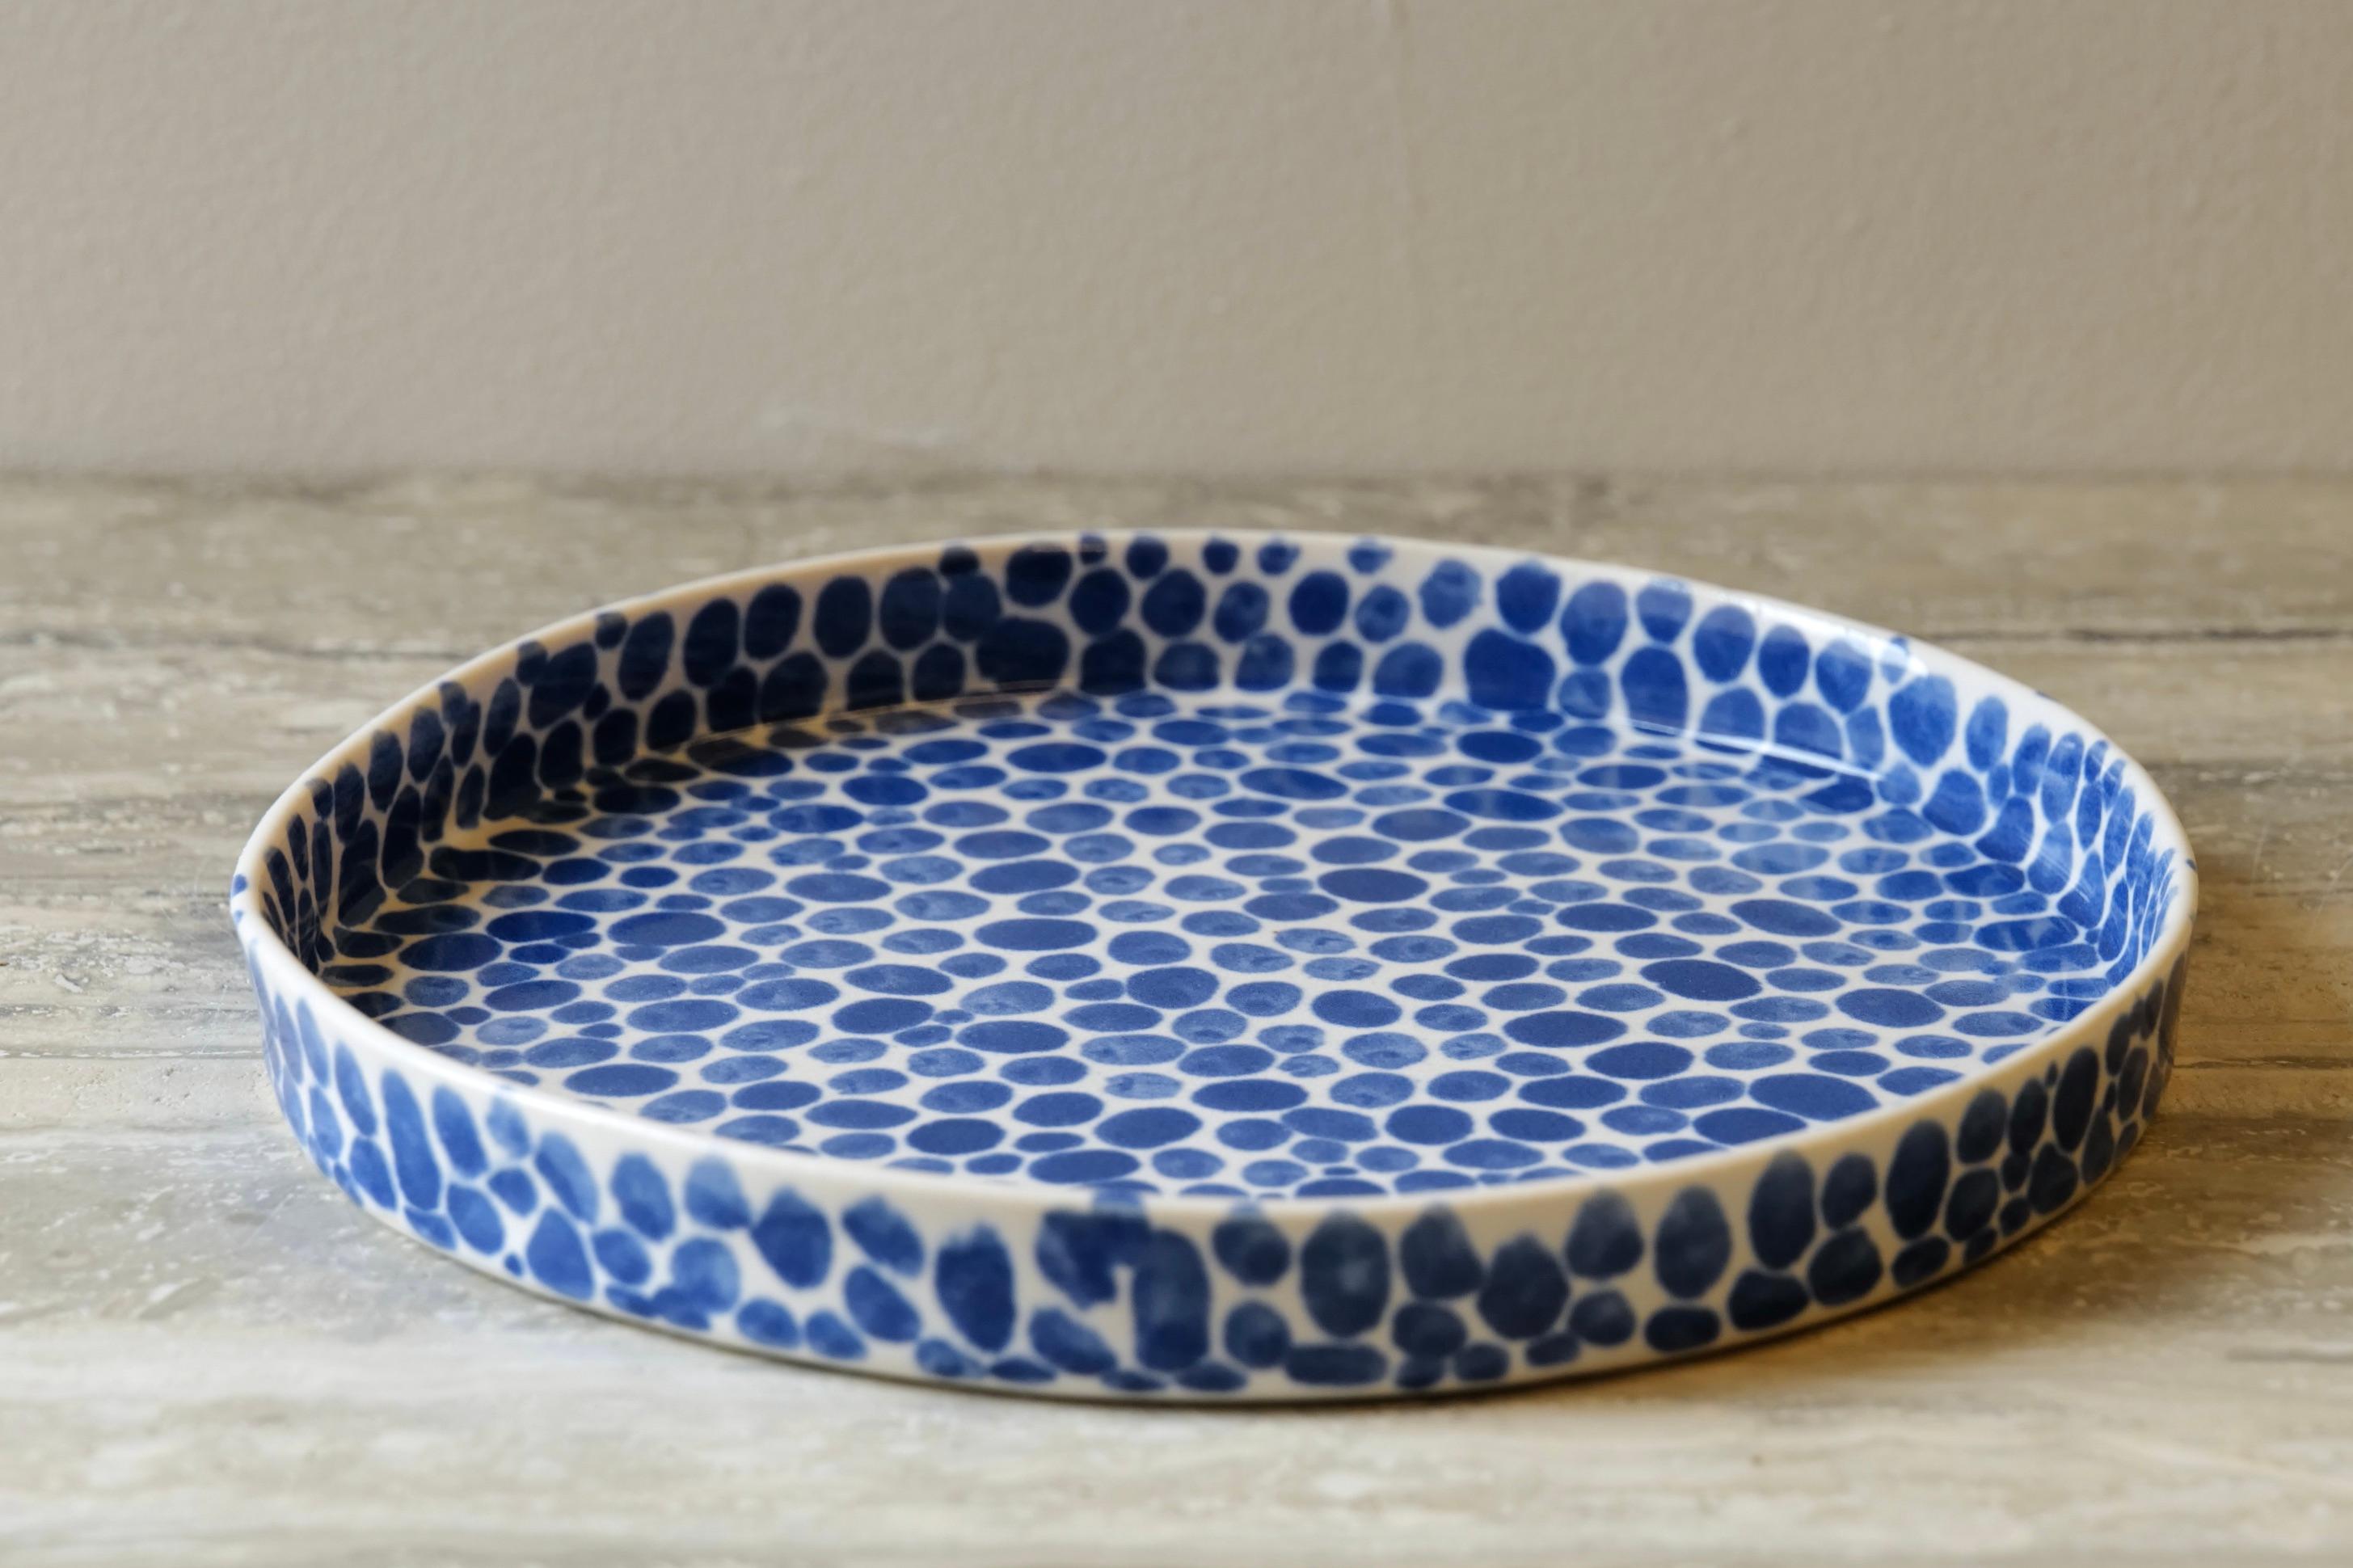 Small porcelain plate. Hand-cast in porcelain and once bisque fired, each dot is hand-painted with a traditional cobalt blue glaze. An unconventional layered glazing technique, developed by the artist, is used in these cast porcelain pieces. The